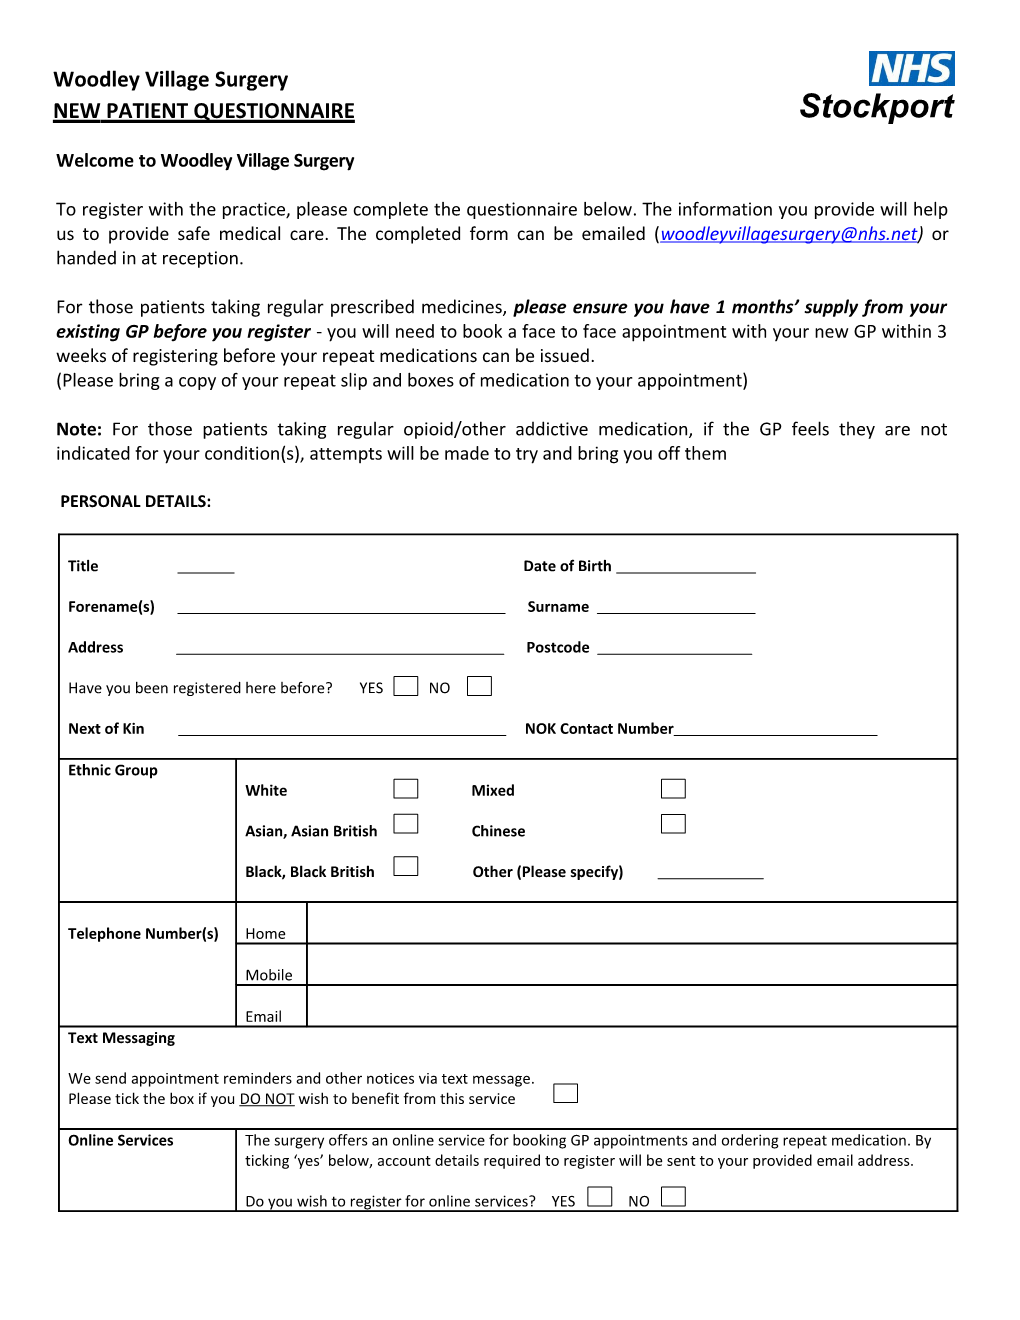 NEW PATIENT QUESTIONNAIRE Stockport